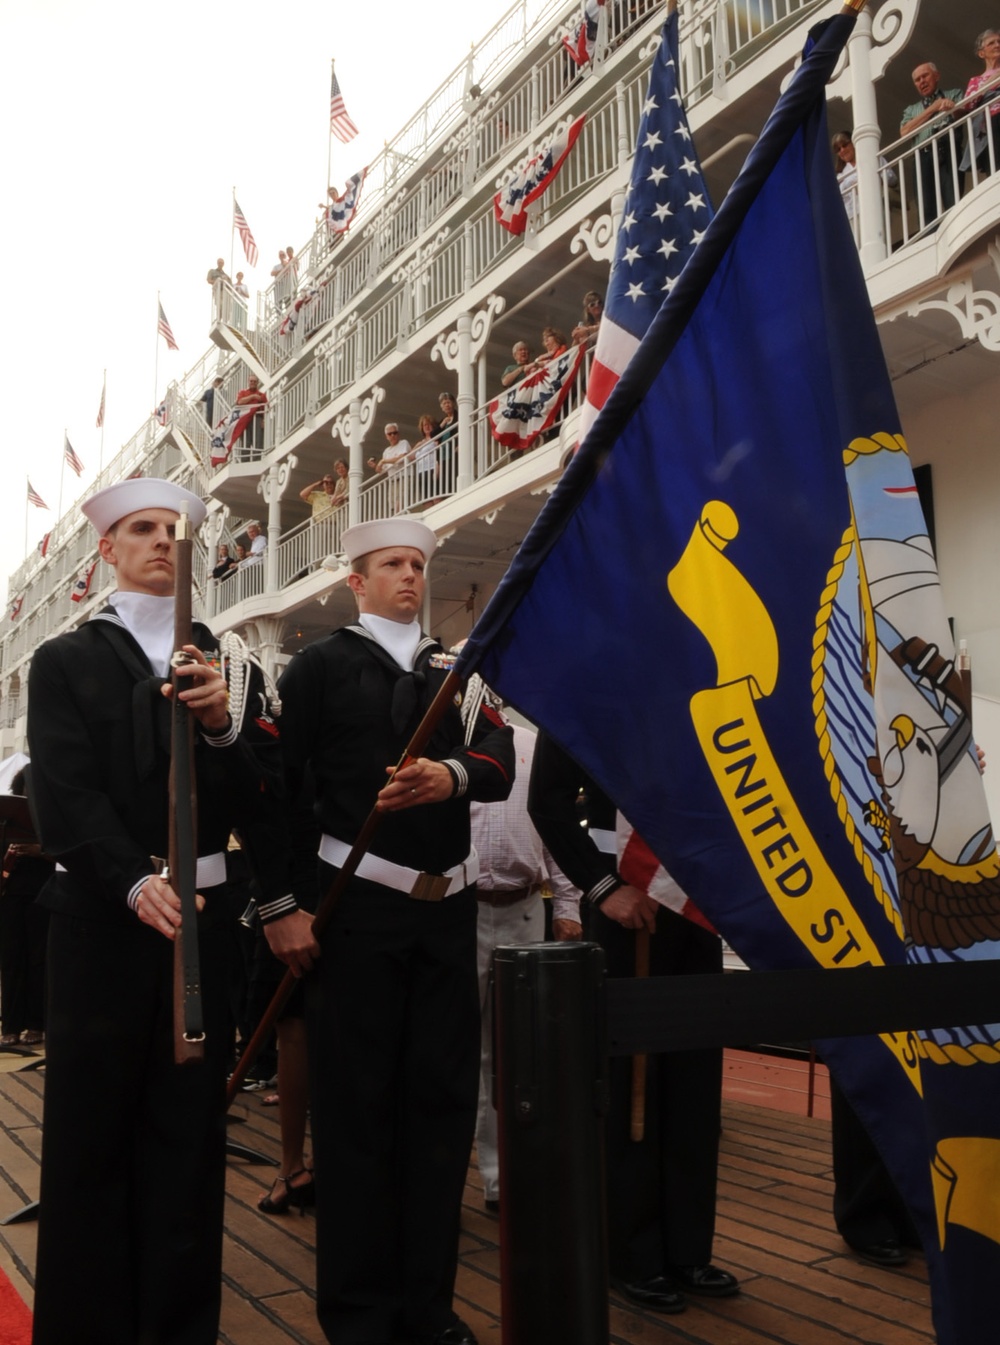 Christening ceremony of the steamboat American Queen